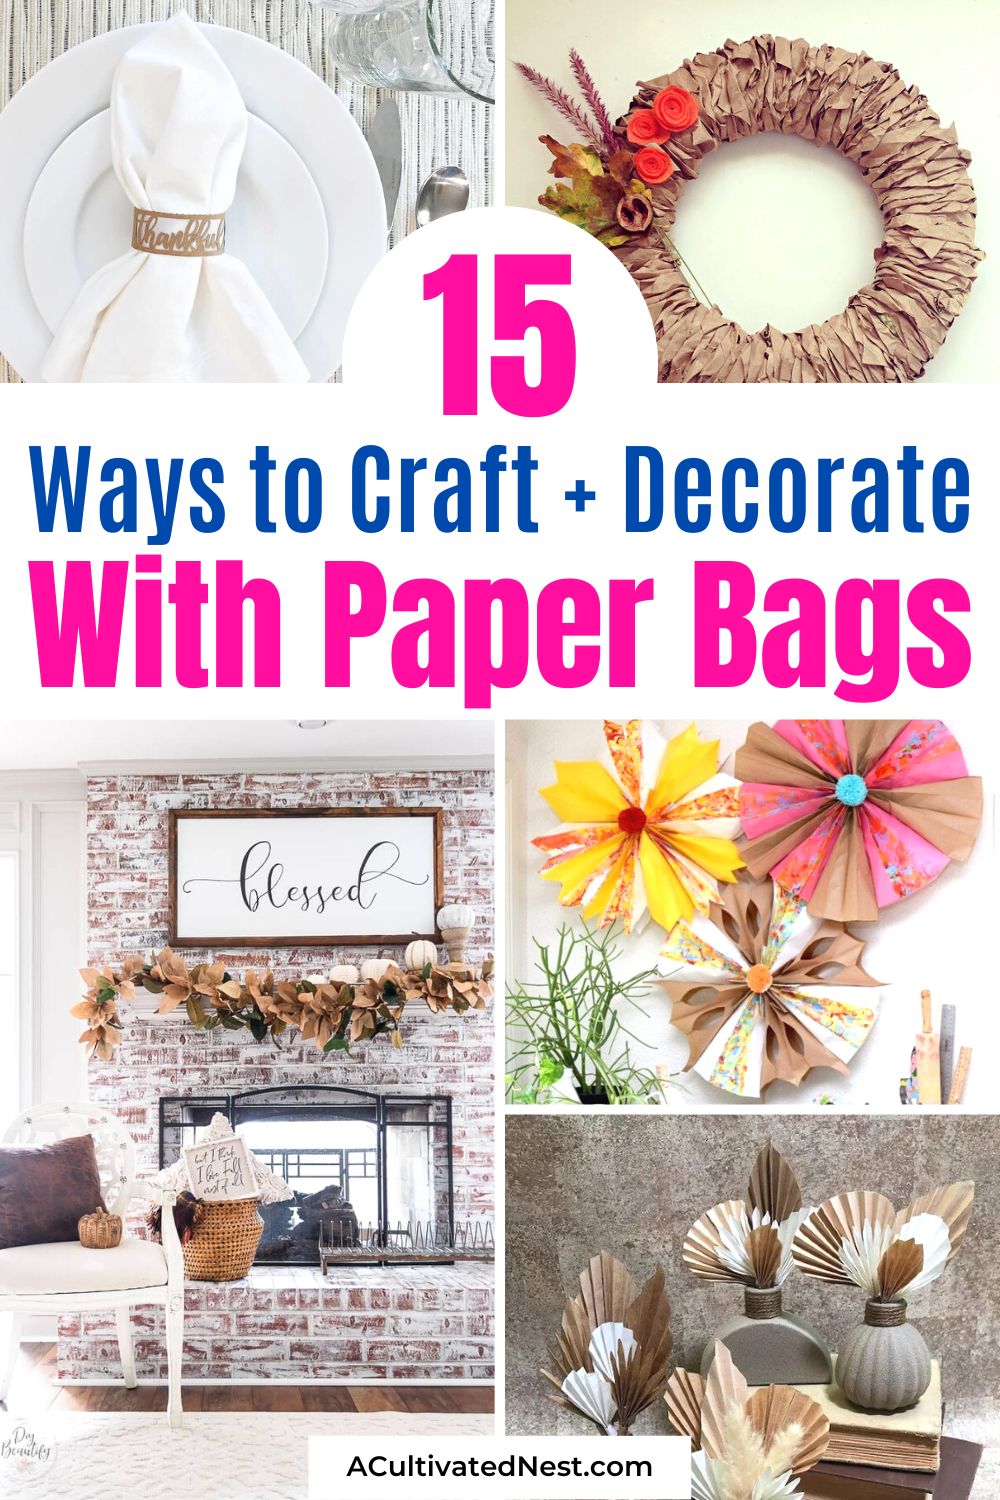 15 Ideas for Crafting and Decorating With Paper Bags- Looking for a fun and eco-friendly way to decorate your home? Check out these creative ideas for crafting and decorating with paper bags! With just a few simple materials, you can transform ordinary paper bags into unique and beautiful décor pieces. | #crafting #diyProjects #upcycling #recycling #ACultivatedNest